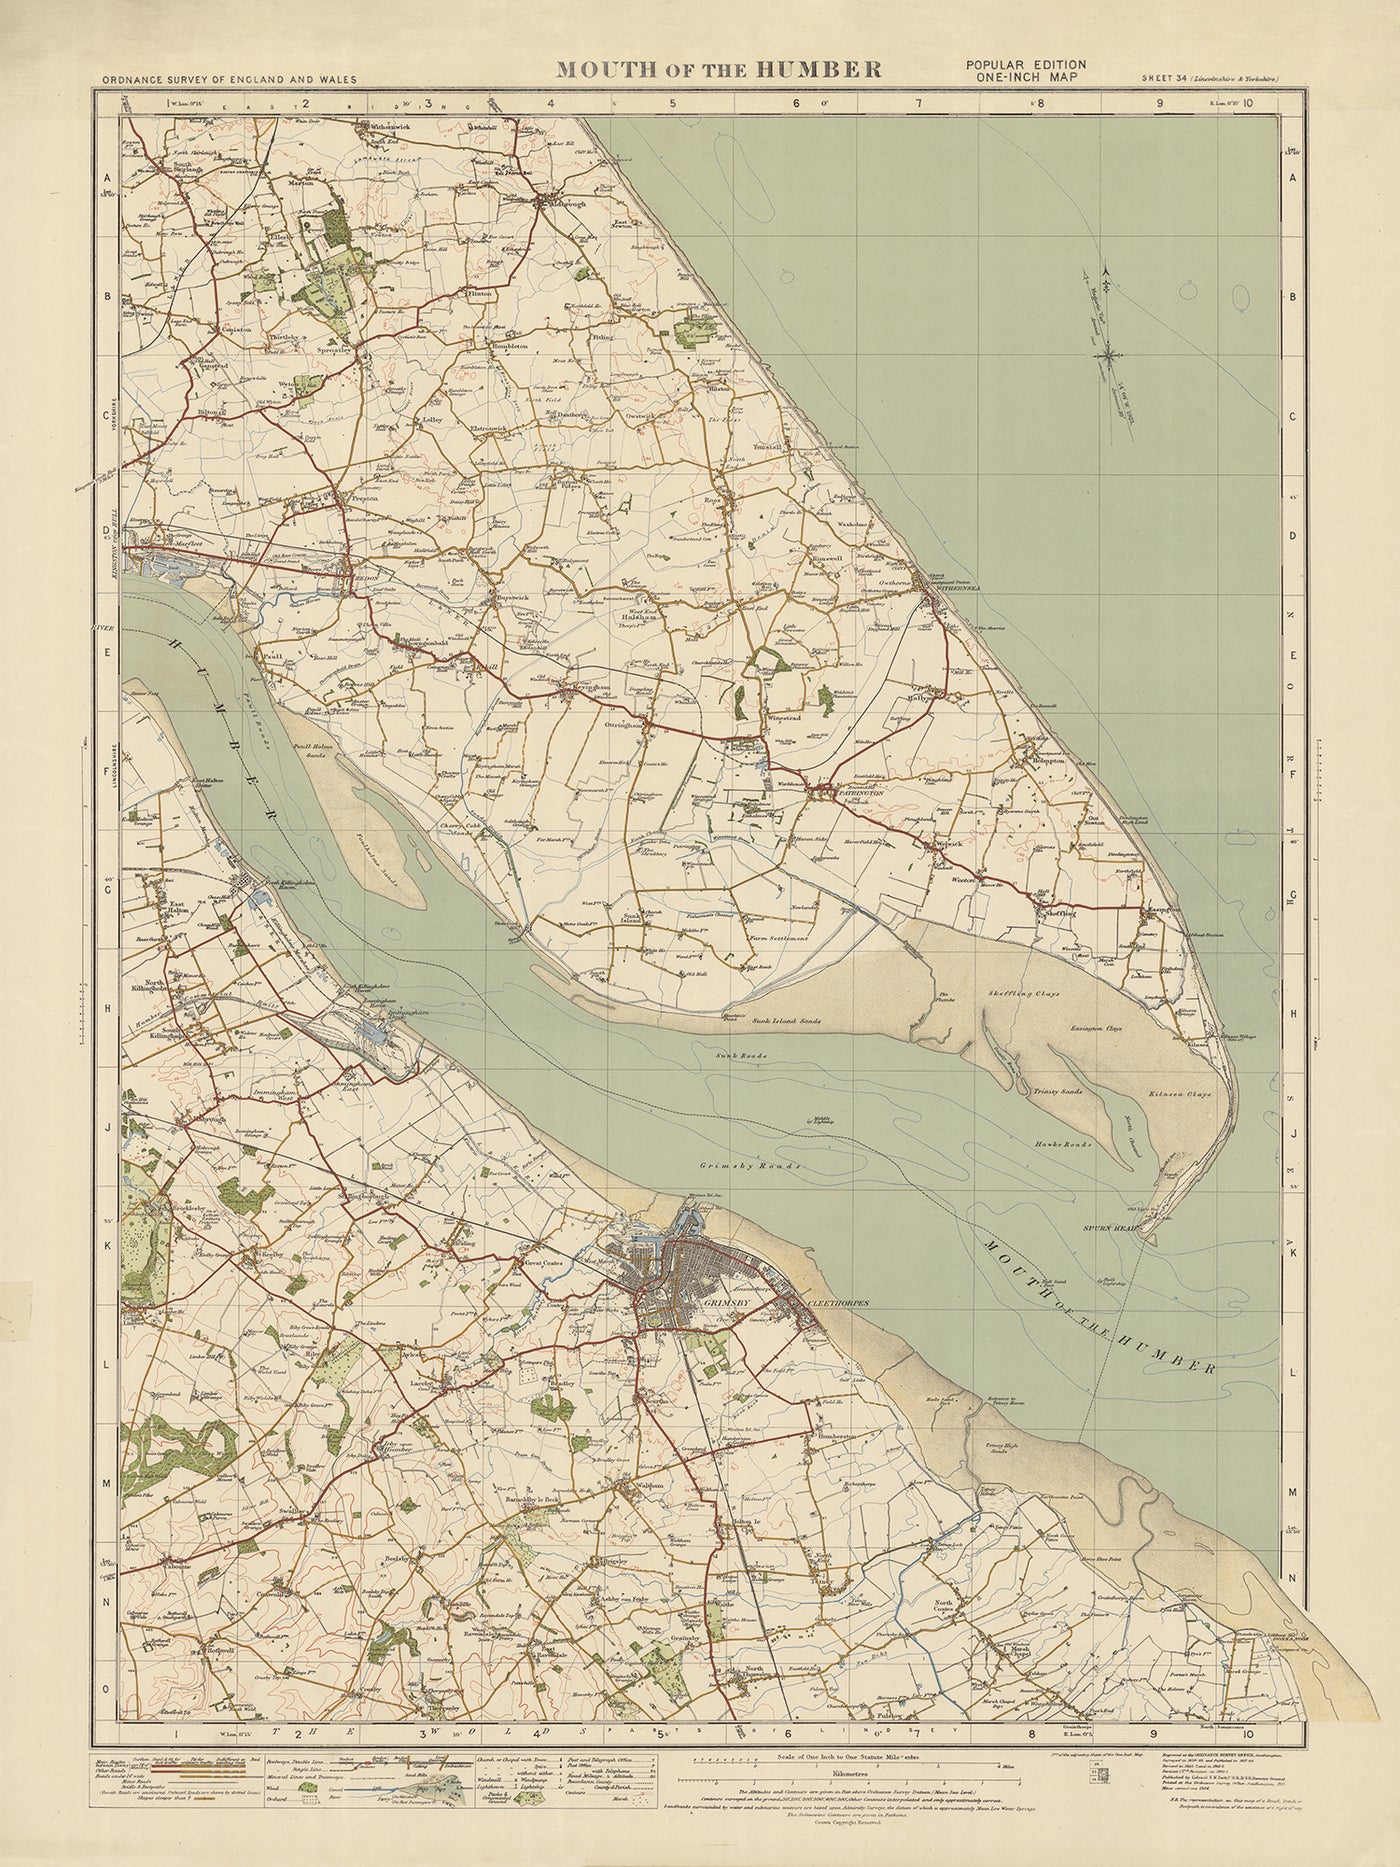 Old Ordnance Survey Map, Sheet 34 - Mouth of the Humber, 1925: Grimsby, Withernsea, Humberston, Immingham, Spurn Heritage Coast